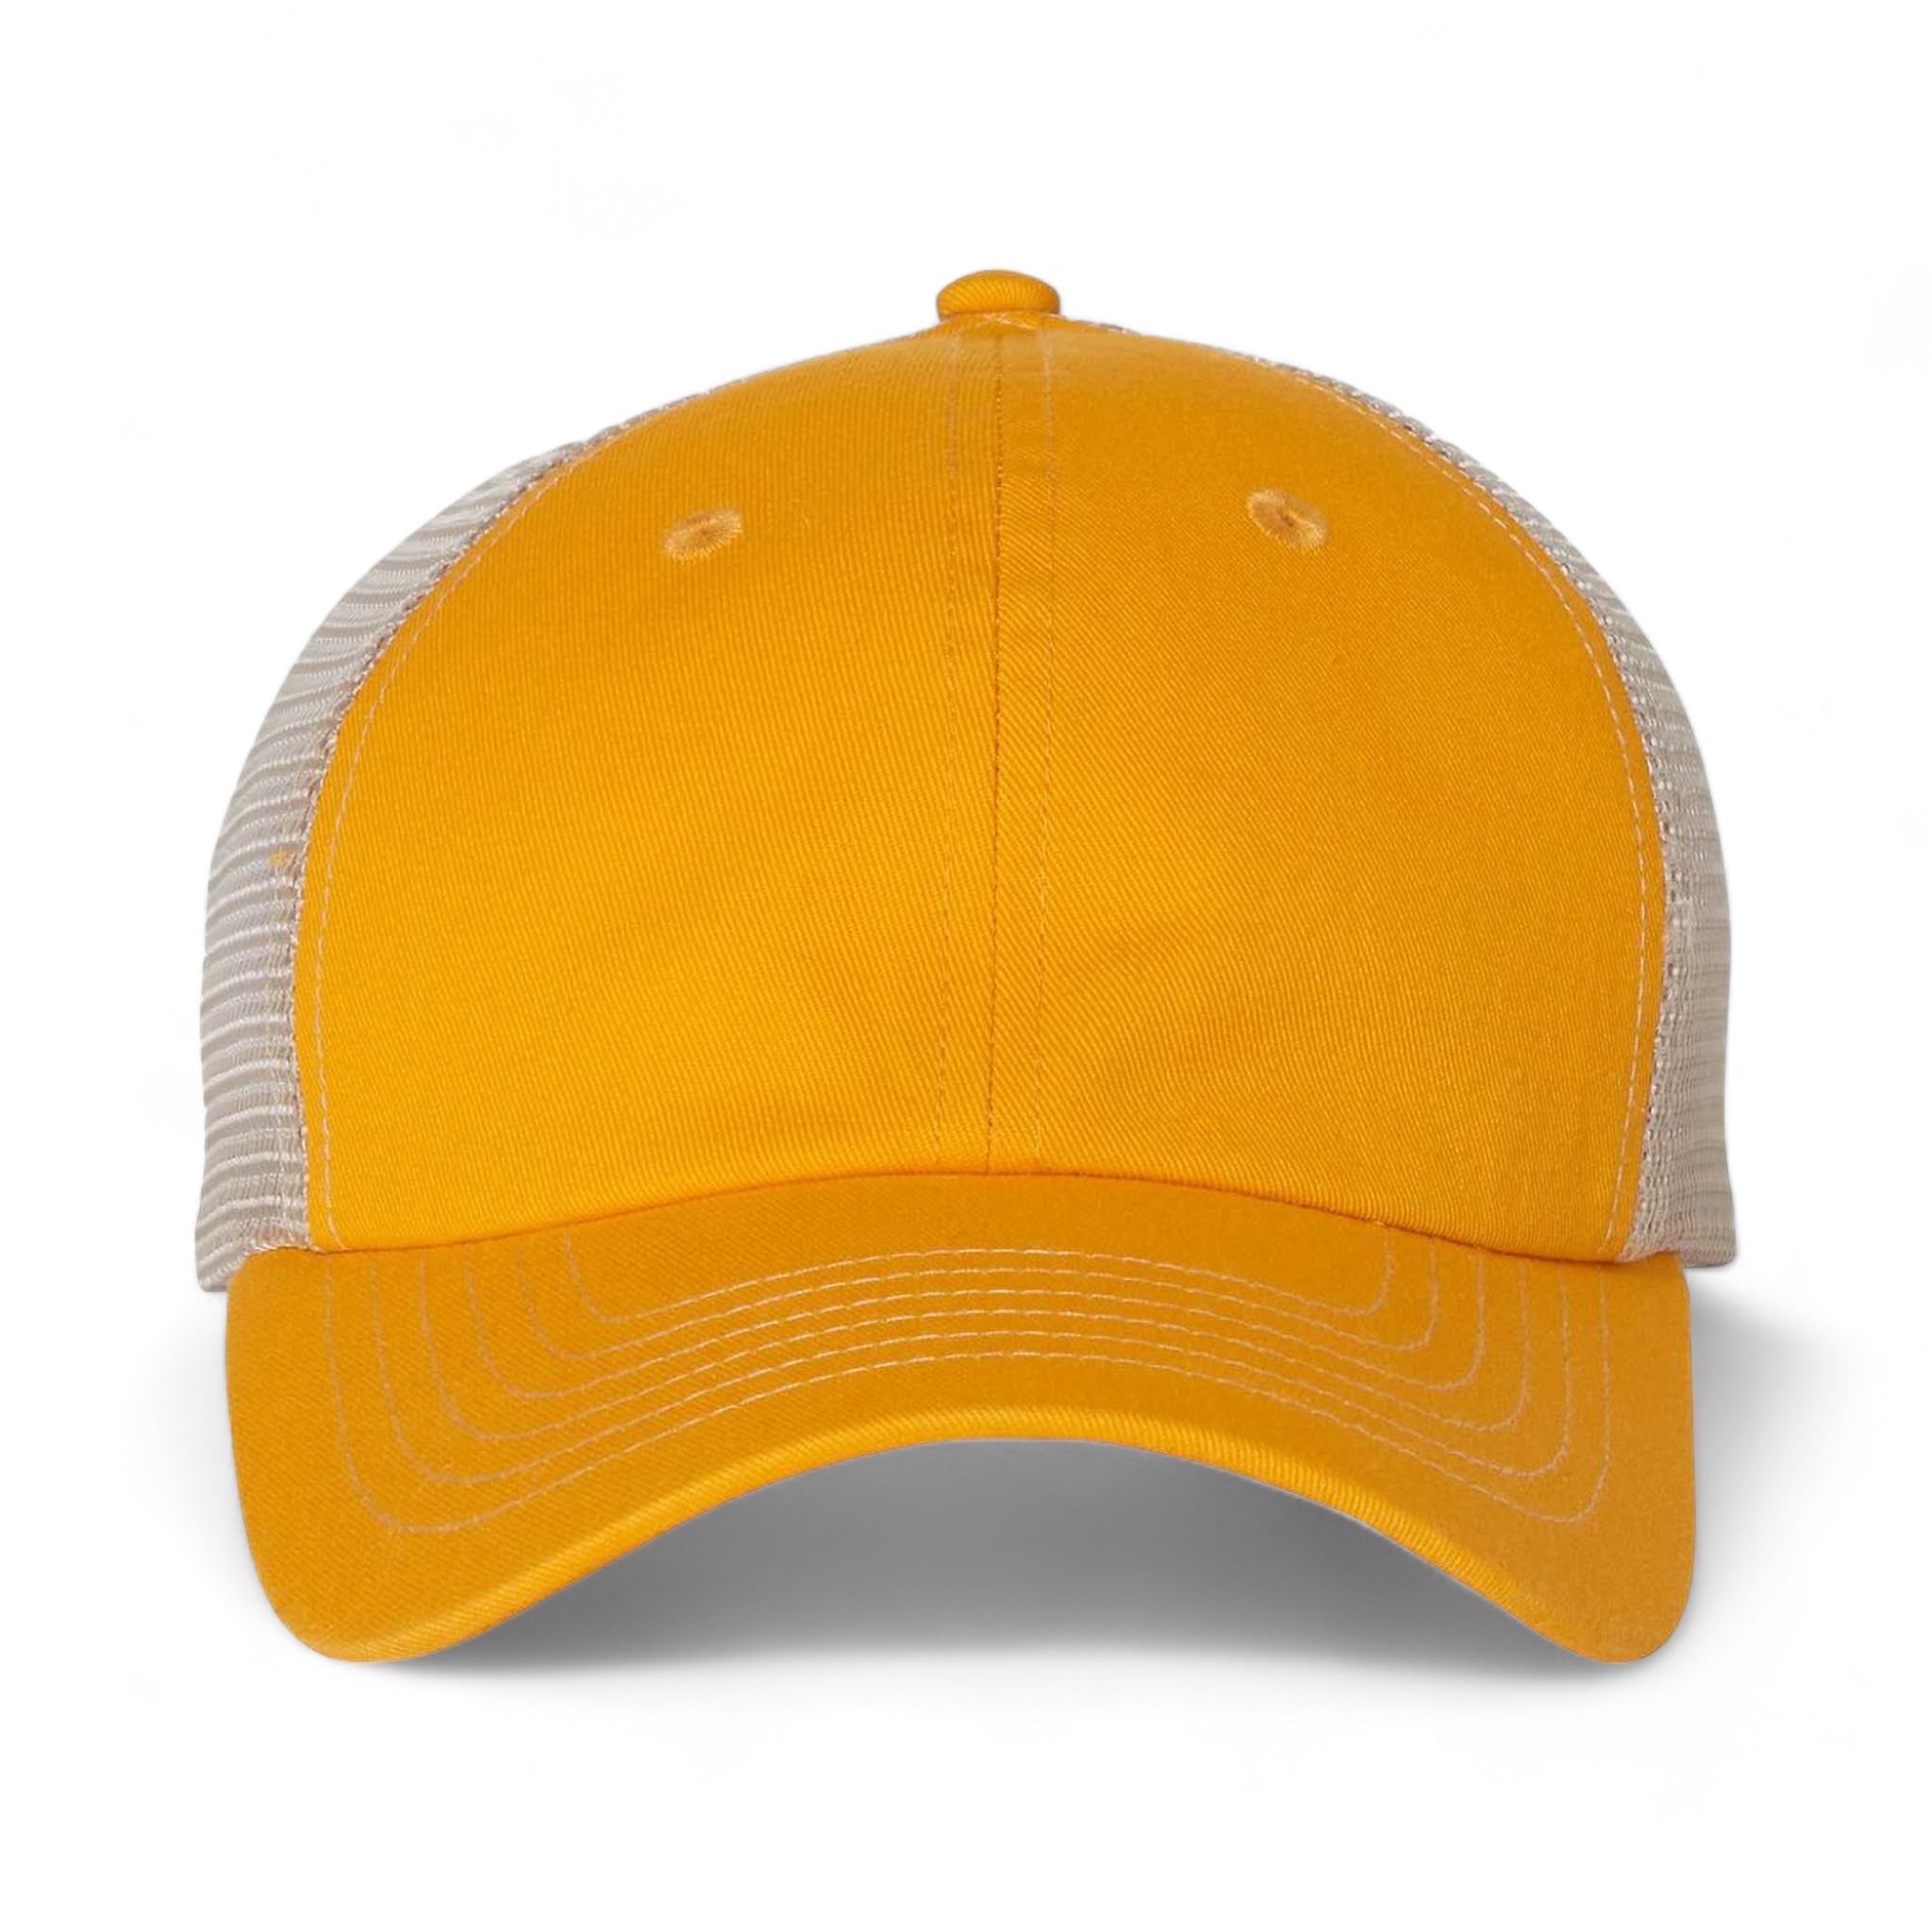 Front view of Sportsman 3100 custom hat in gold and stone